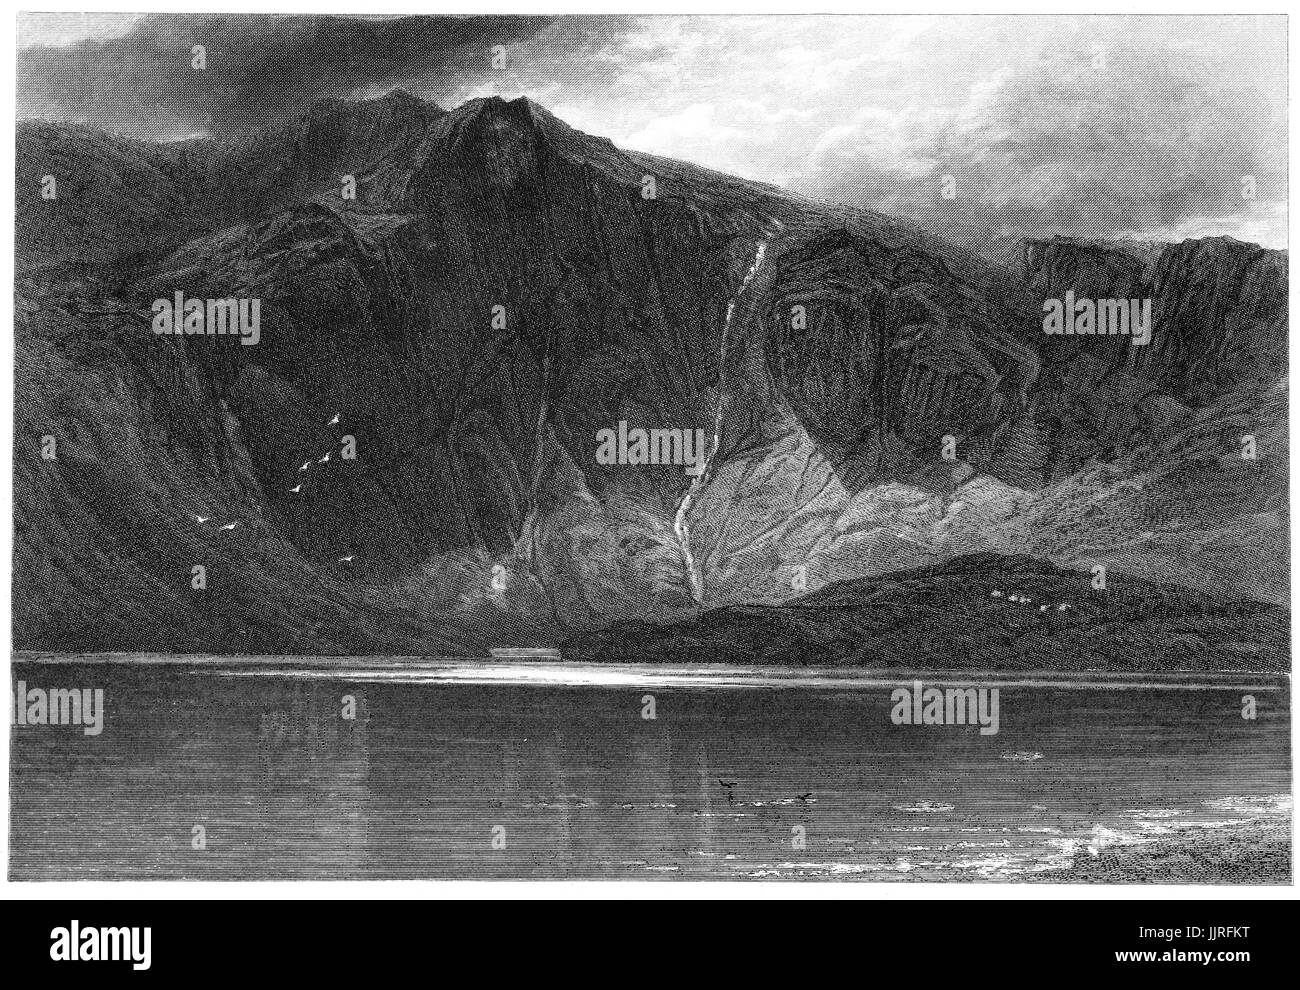 1870: Llyn Idwal is a small lake that lies within Cwm Idwal in the Glyderau mountains of Snowdonia, Gwynd, North Wales. Stock Photo